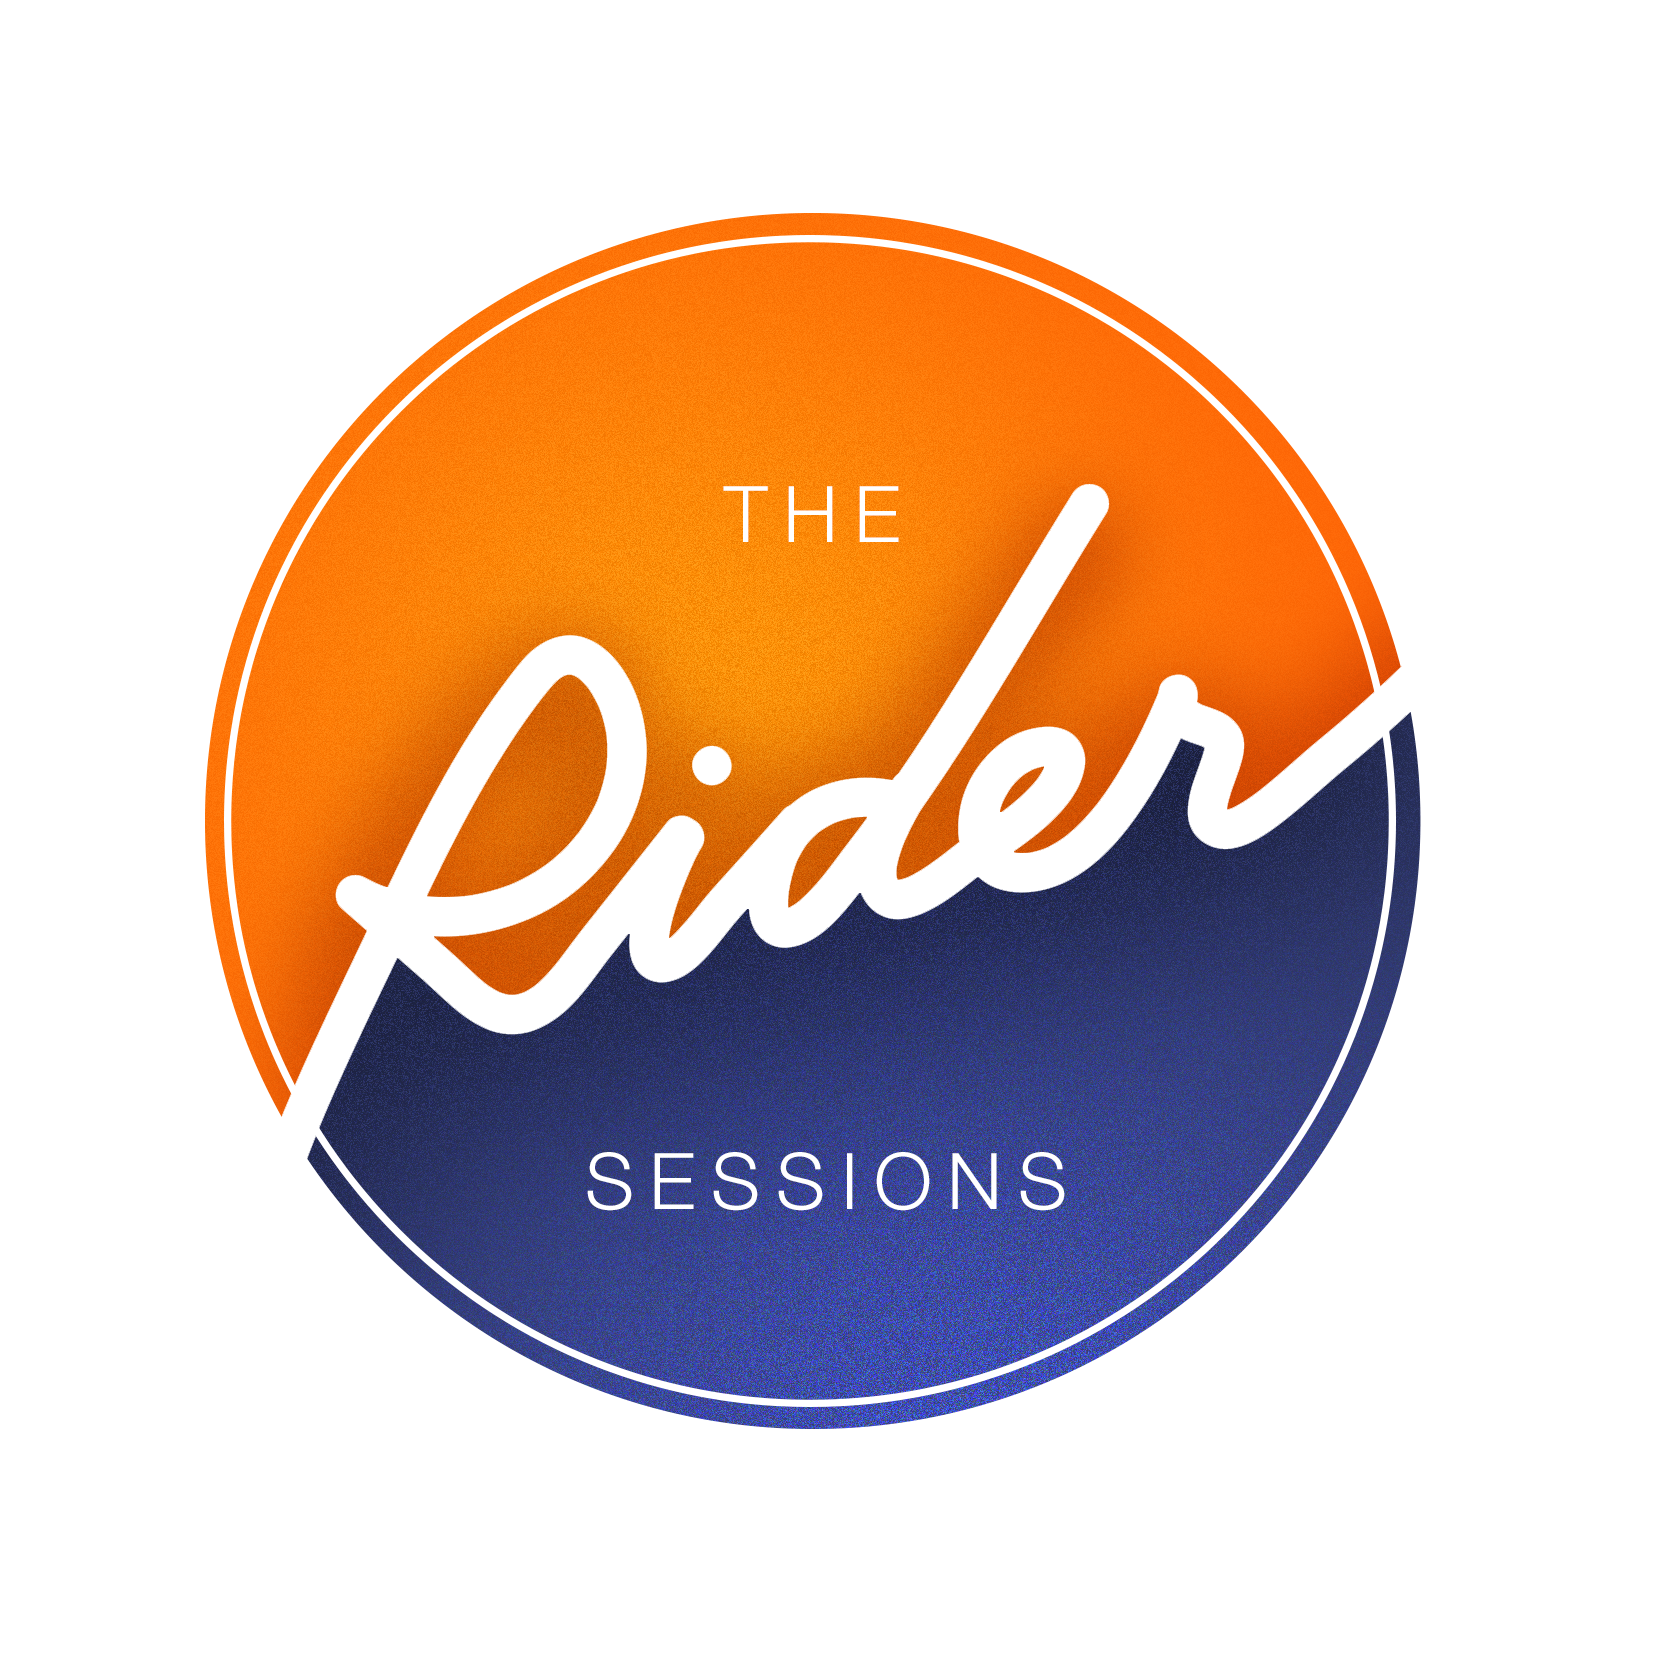 The rider sessions logo